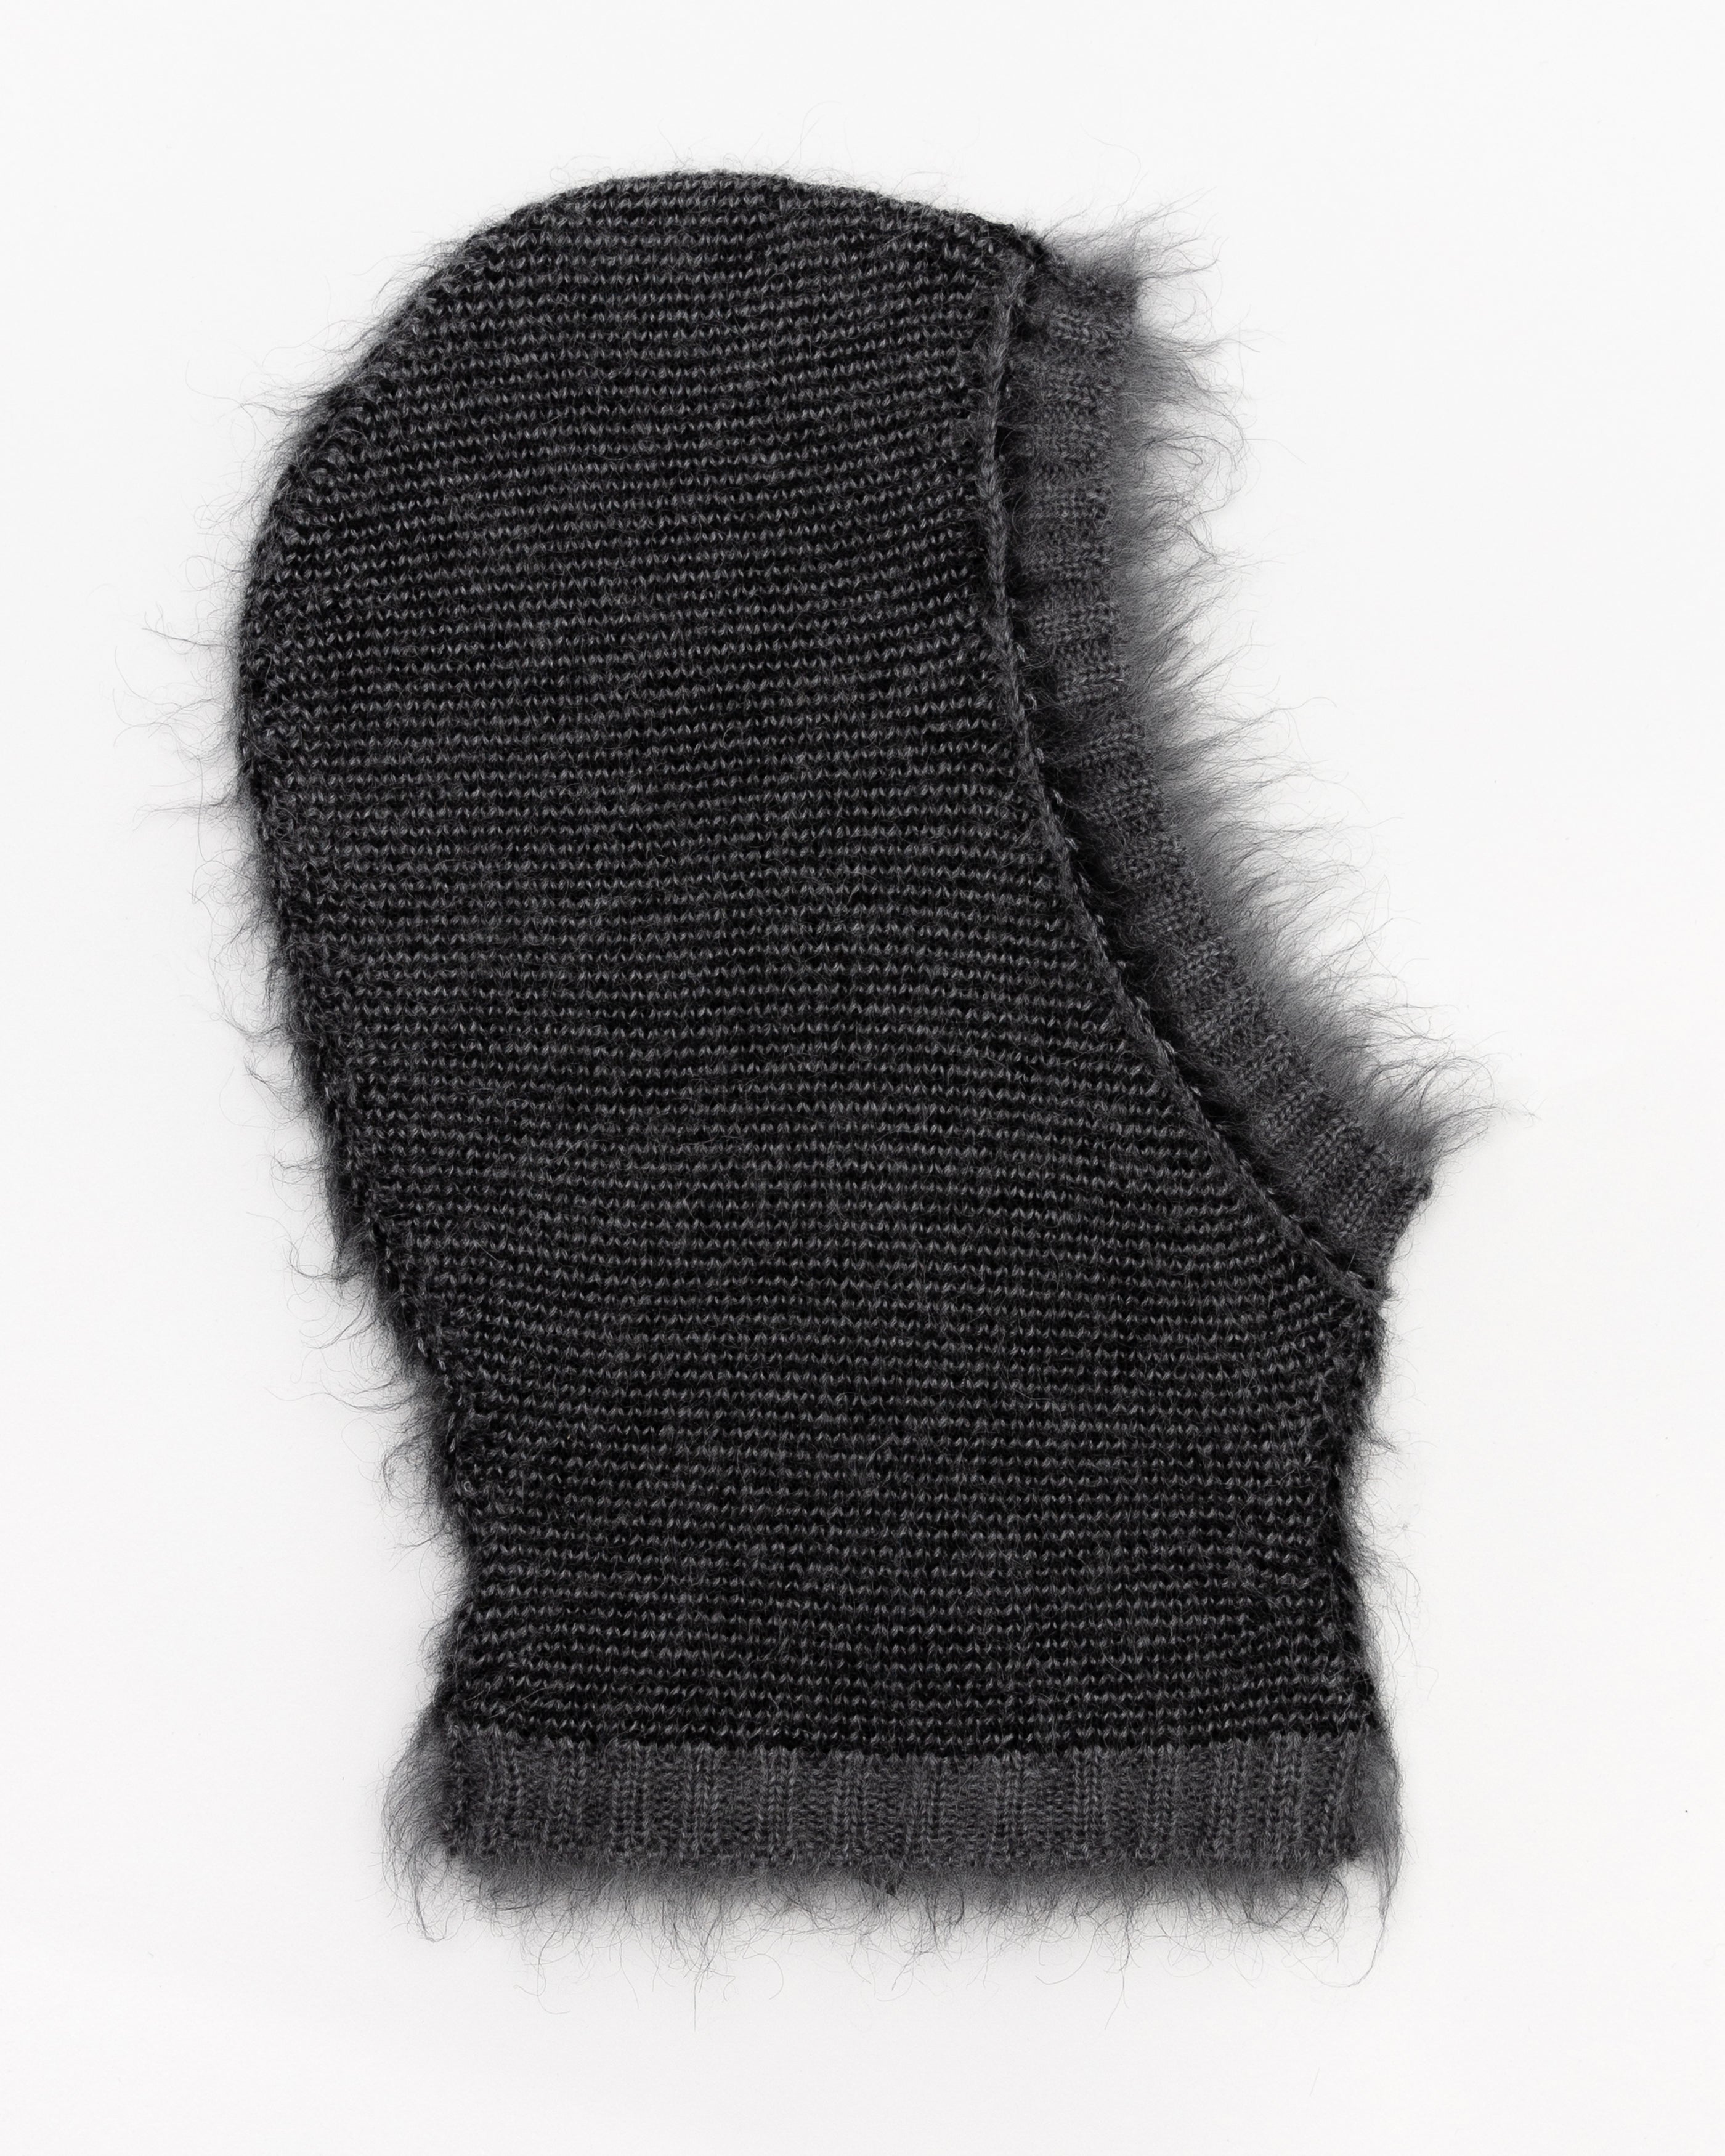 Brushed Mohair Mask in Black and Grey